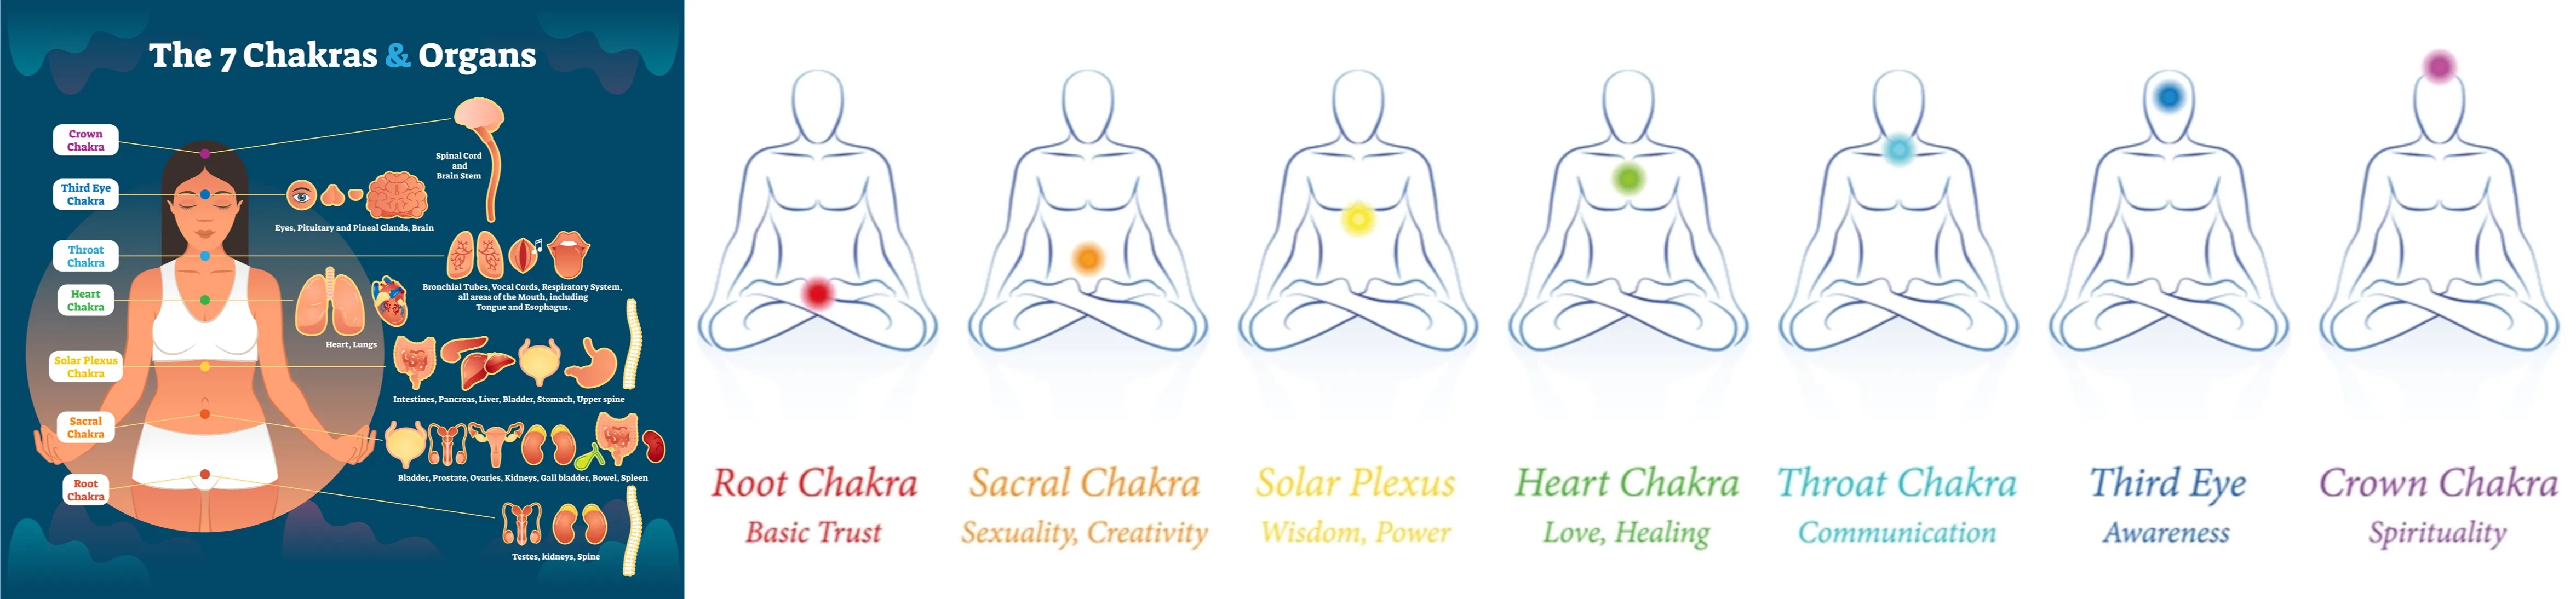 The 7 Chakras (Energy Centers) and Endocrine system organs represent respective influential emotions. (The emotional settings I brought are slightly broader.)